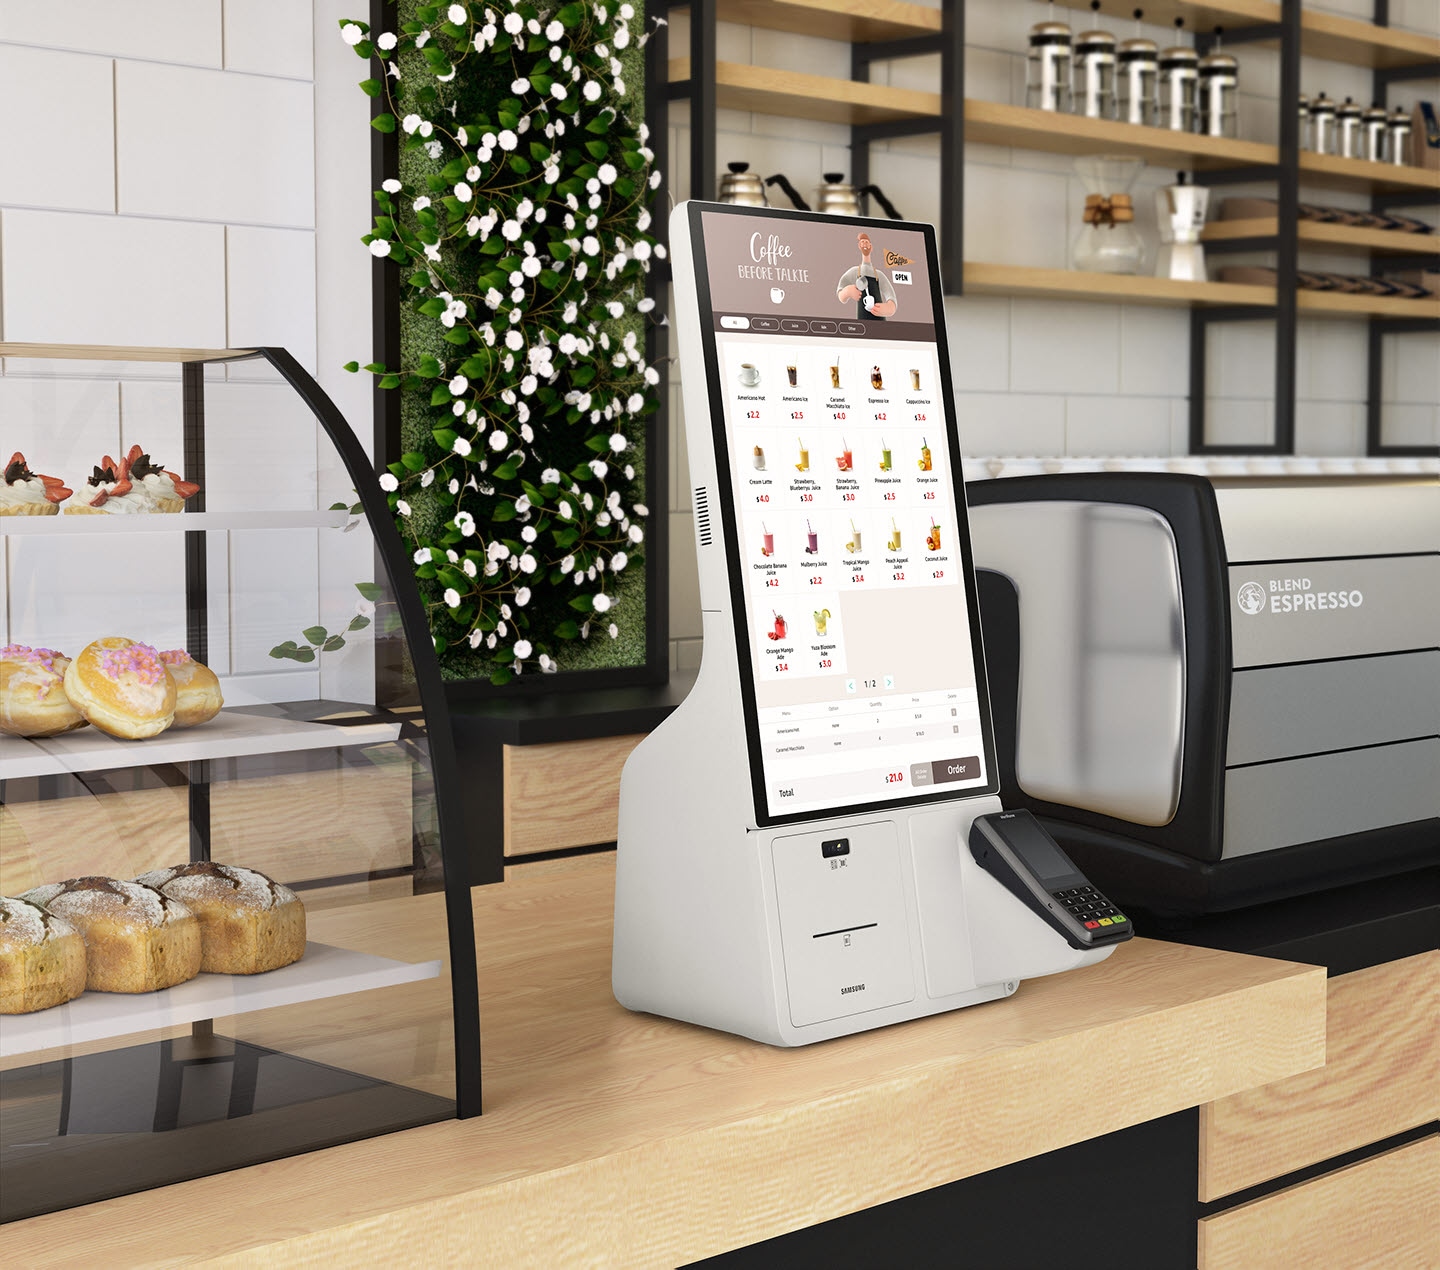 The Samsung Kiosk operating on a cafe countertop.